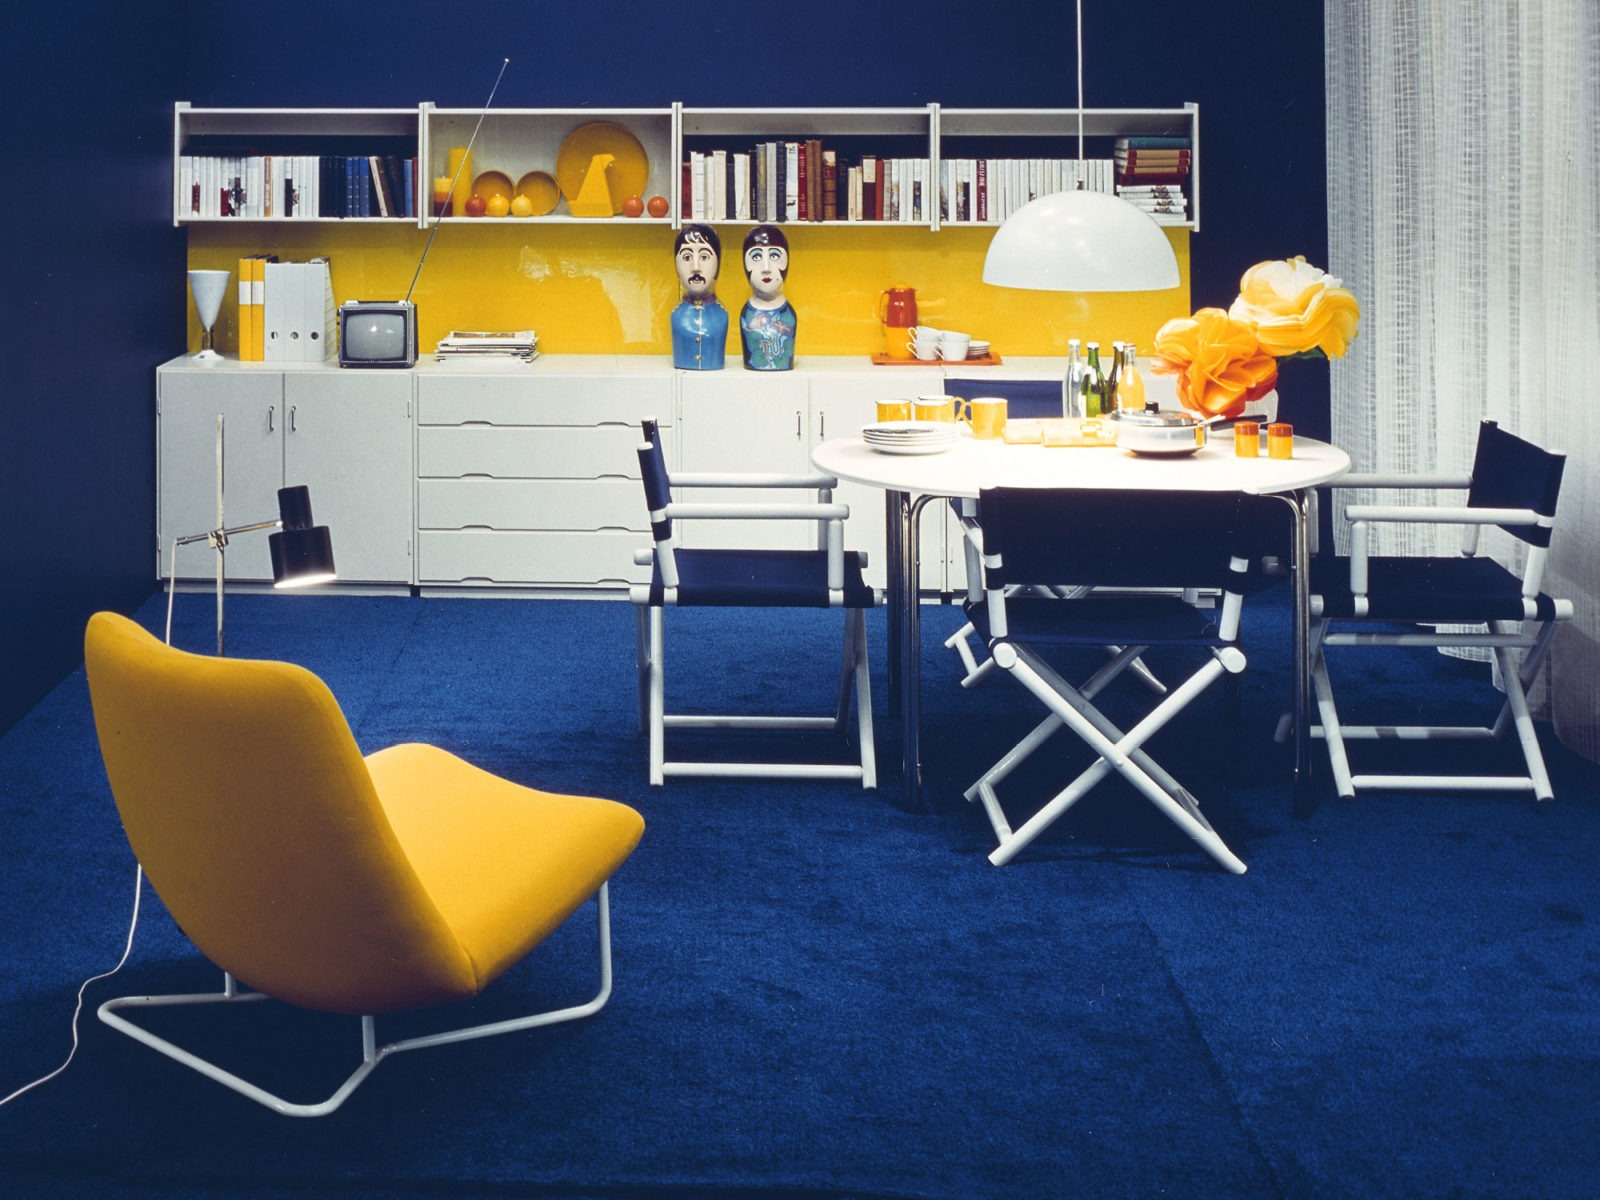 1970s style interior with blue carpet, white table, blue director's chairs, yellow armchair and white shelving system.